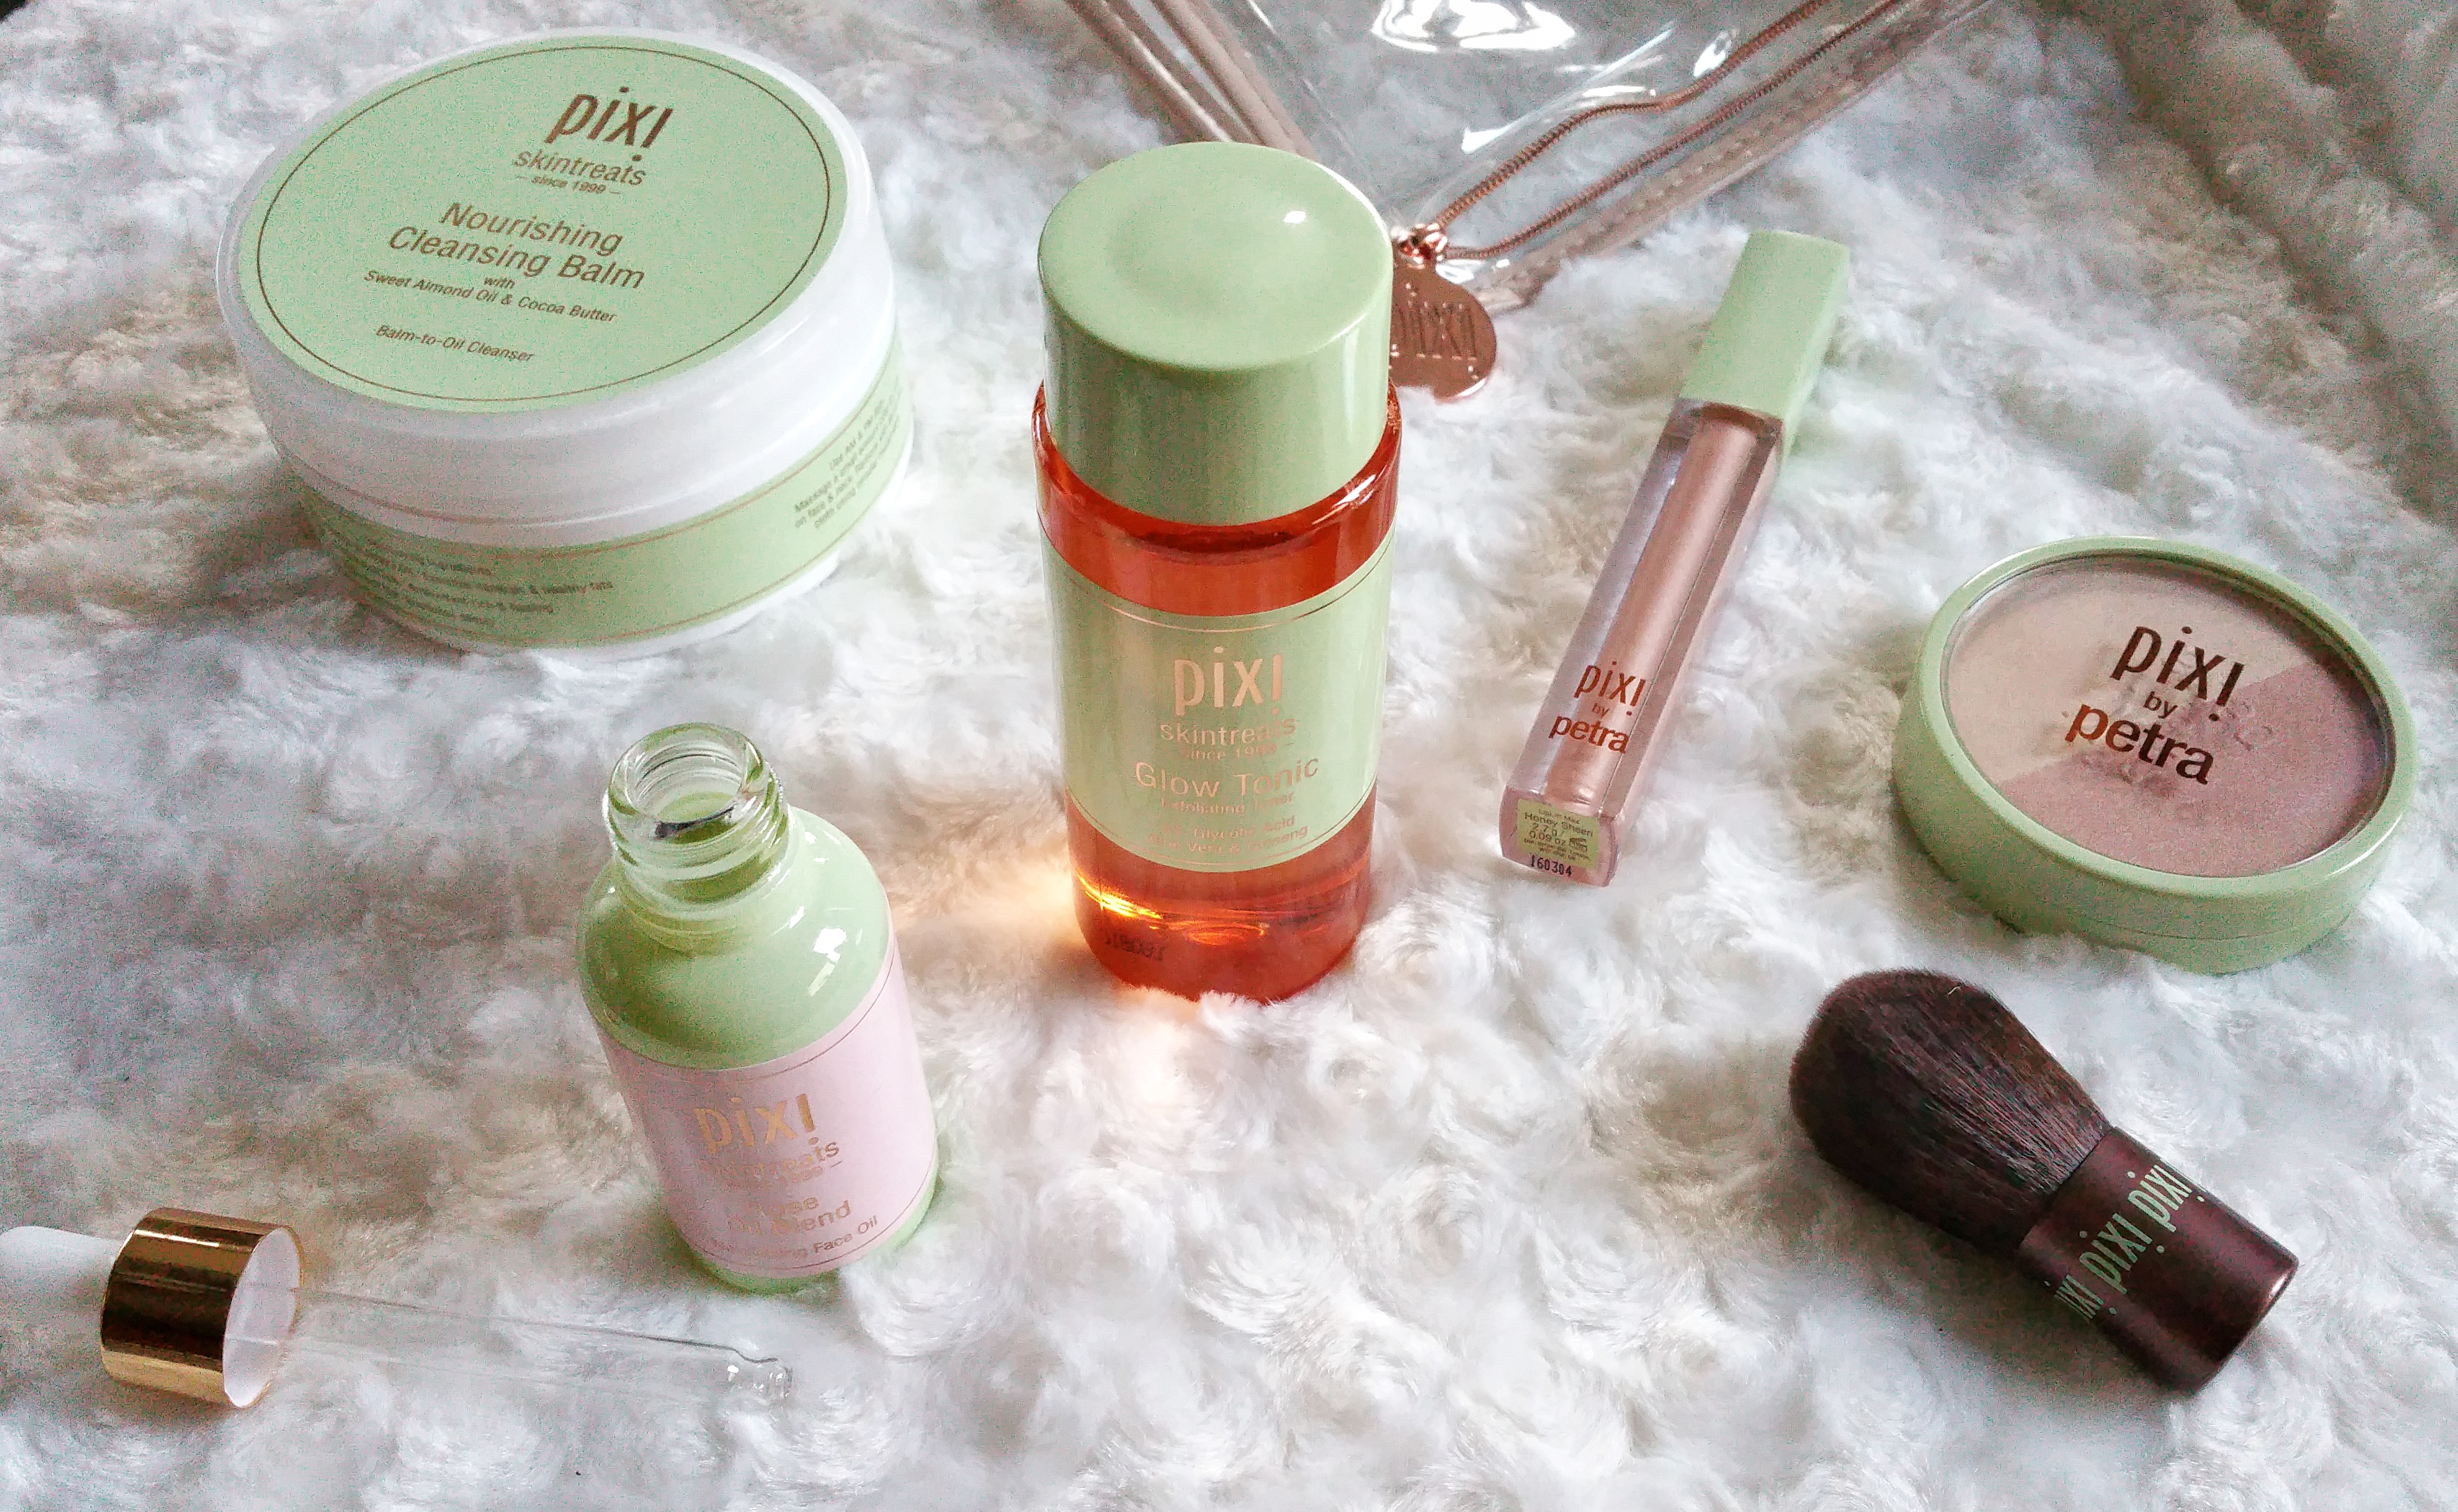 Pixi Beauty, Pixi, cosmetics, makeup, review, product review, beauty review, beauty, pixi nourishing cleansing balm, pixi glow tonic, pixi rose oil blend, pixi beauty blush duo and kabuki in peach honey, peach honey, pixi liplift max, pixi products, cosmetic products, swatches,